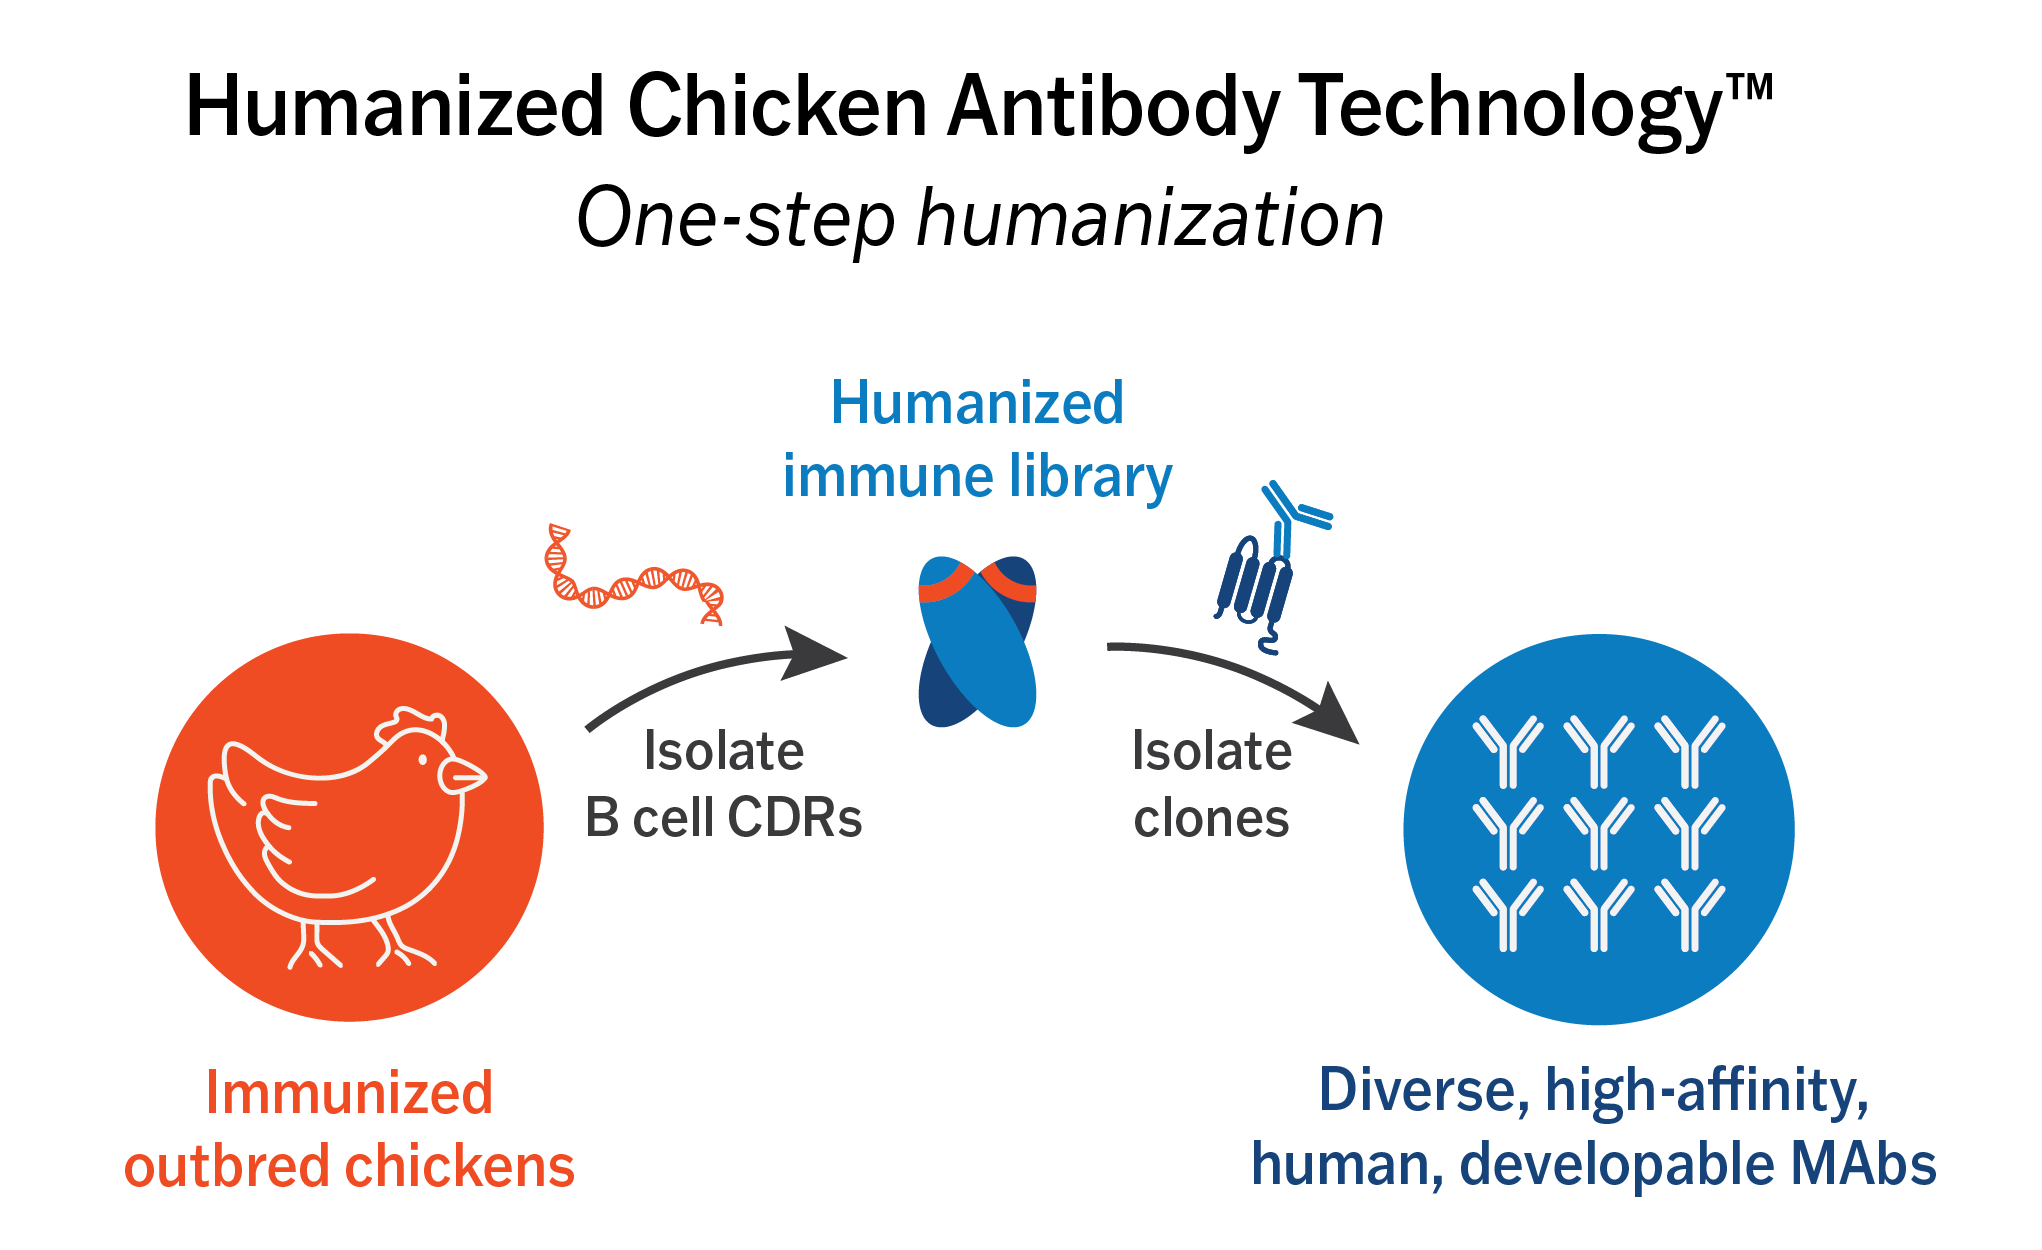 Overview of Humanized Chicken Antibody Technology one-step humanization. B cell CDRs are isolated from immunized outbred chickens to make a humanized immune library. Library clones are isolated to generate a selection of diverse, high-affinity, human, developable MAbs.